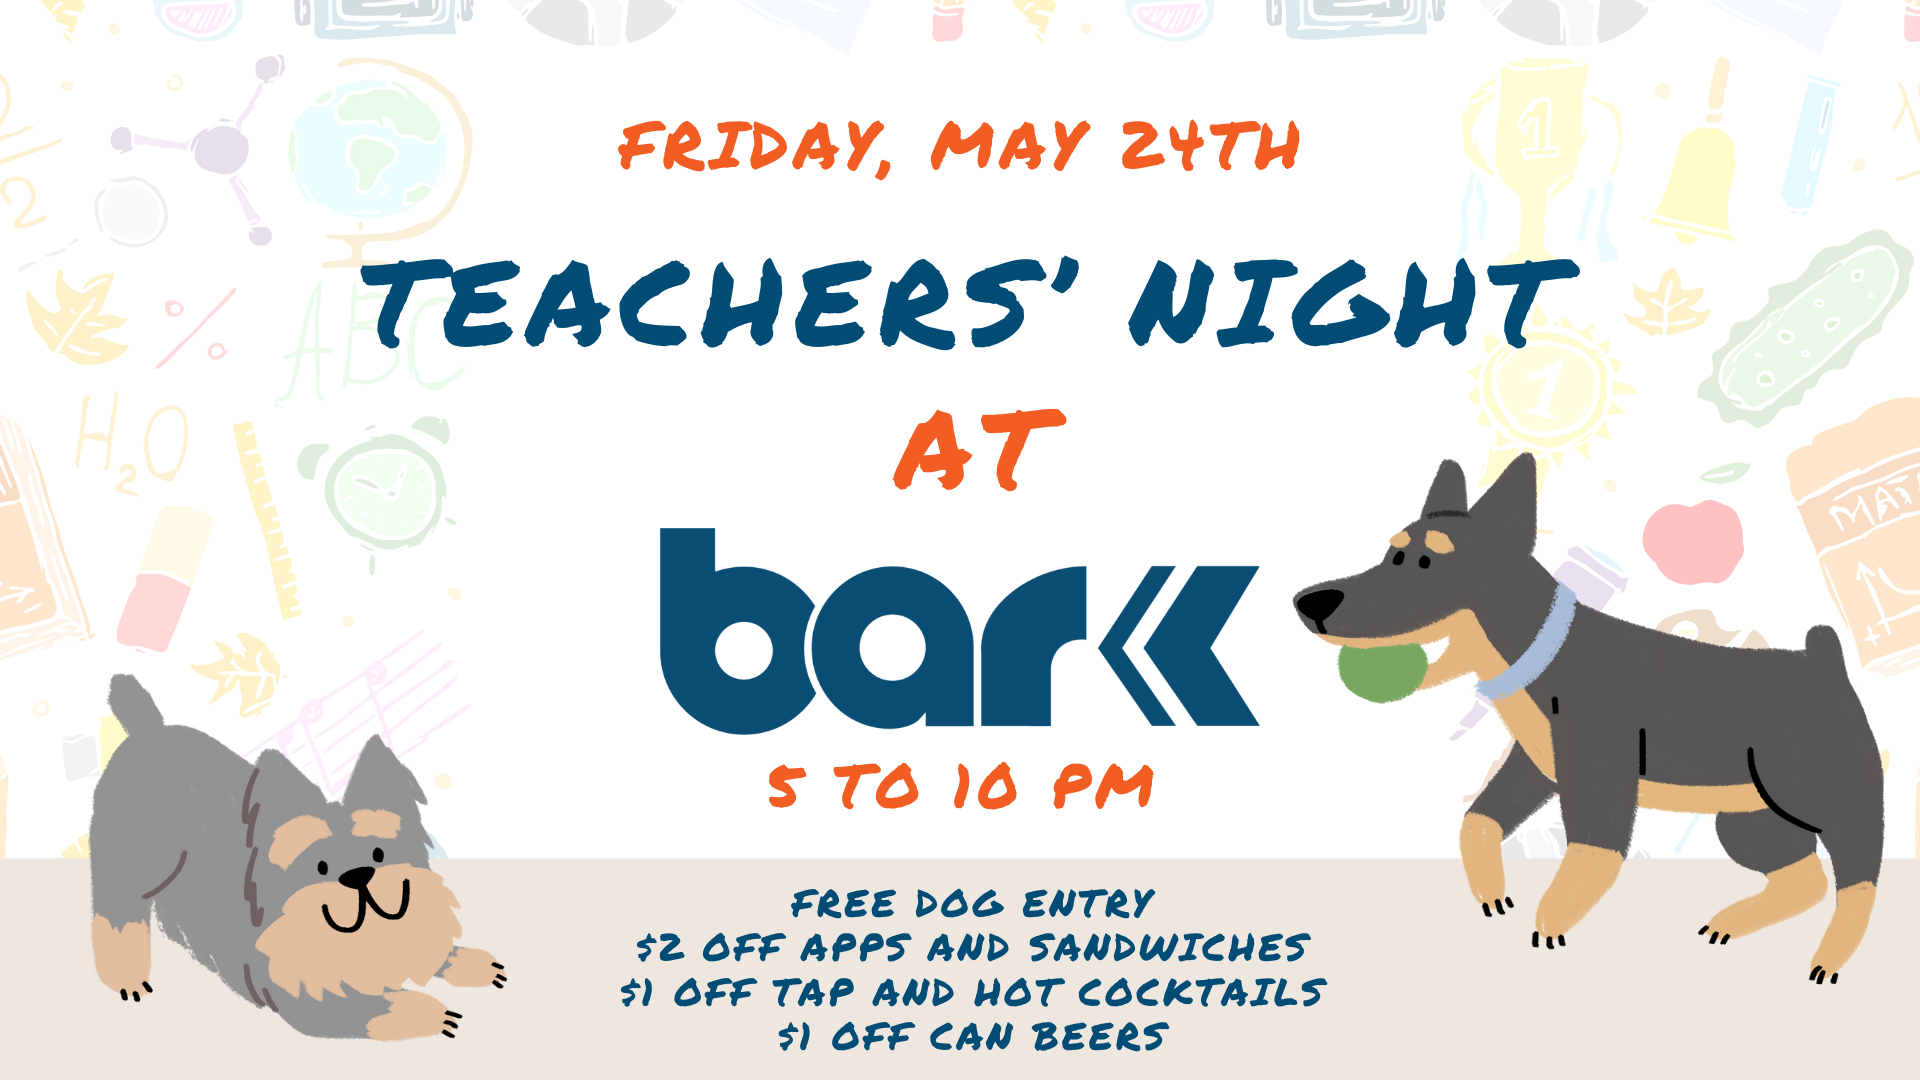 Friday, May 27th Teachers Night at Bar K 5pm to 10 pm Free dog entry $2 off apps and sandwiches $1 off Tap and Hot cocktails $1 off can beers